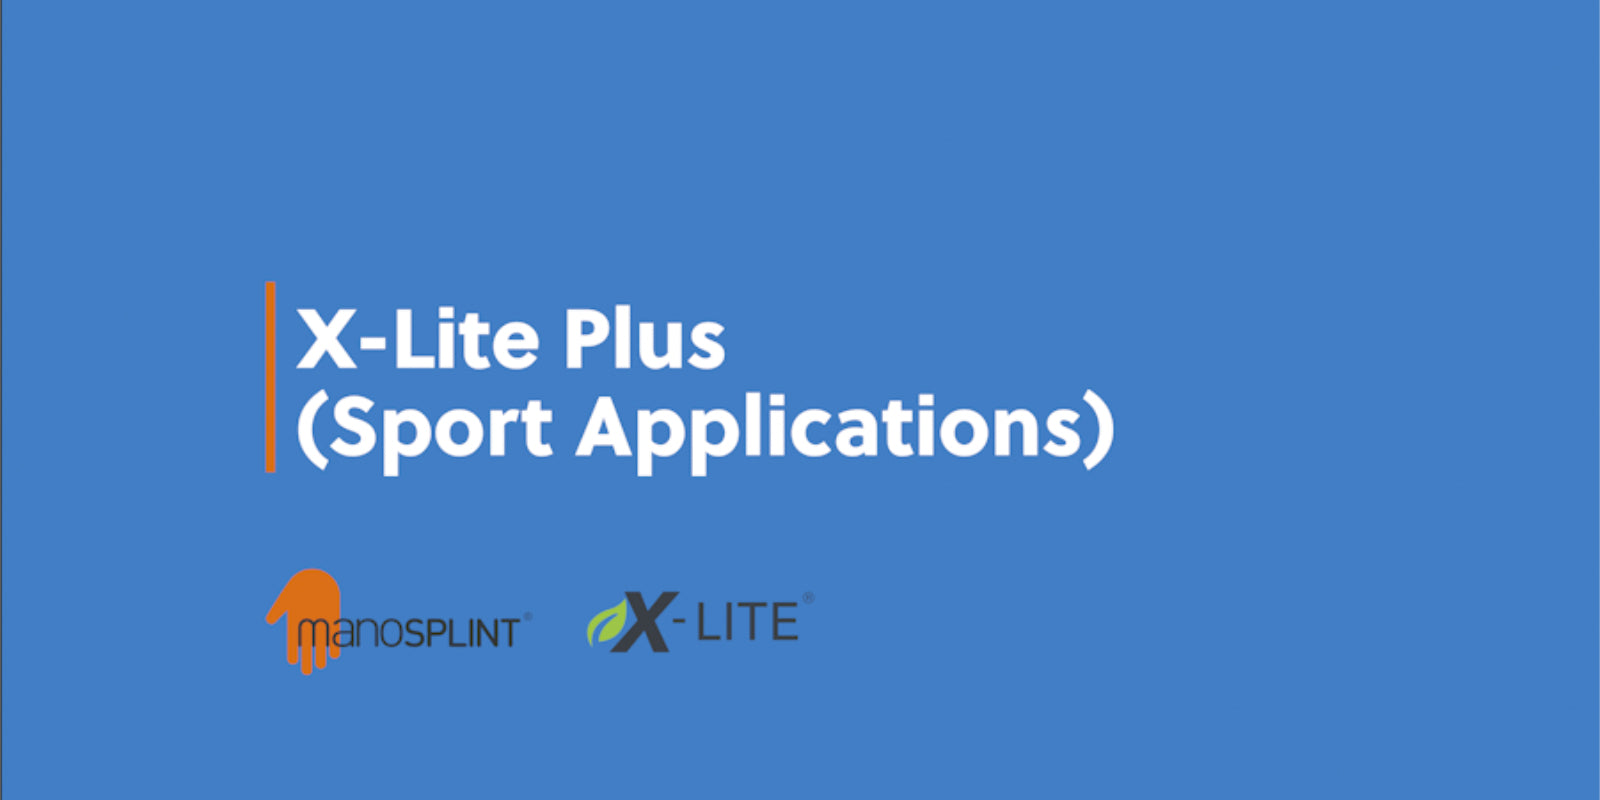 In this video Alison Coyle (Hand Therapist) shows you how to use X-Lite Plus to treat sports injuries.